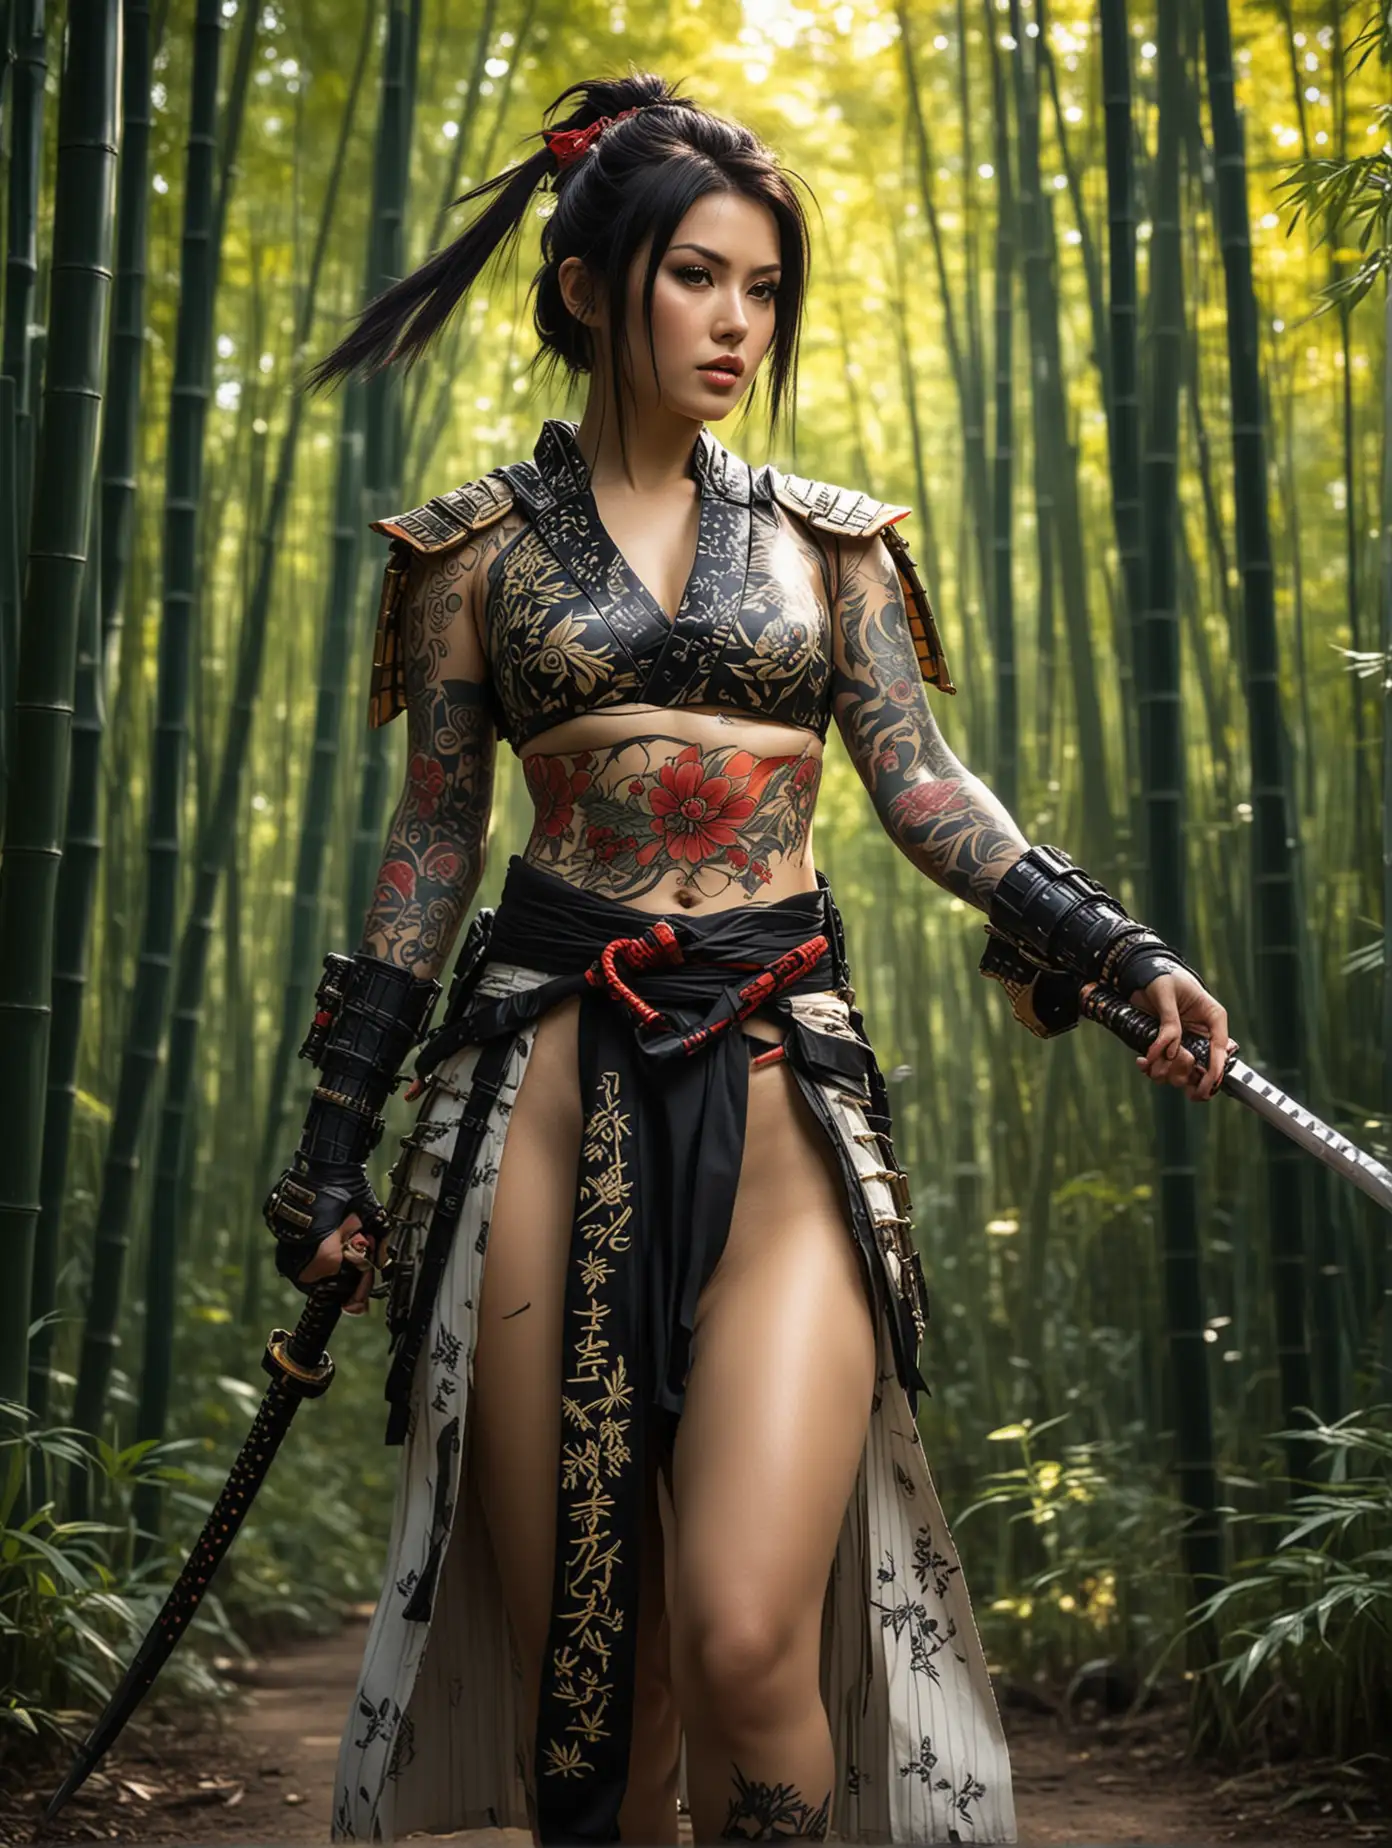 Maria Ozawa was cosplaying as ashigaru warrior, carrying a katana, walking graceful and elegant, The background is a vibrant deepest bamboo forest with bright hues, light ray tracing of sunshine, elegant, graceful, She has a large tattooed across her chest, giving the overall composition an edgy feel.